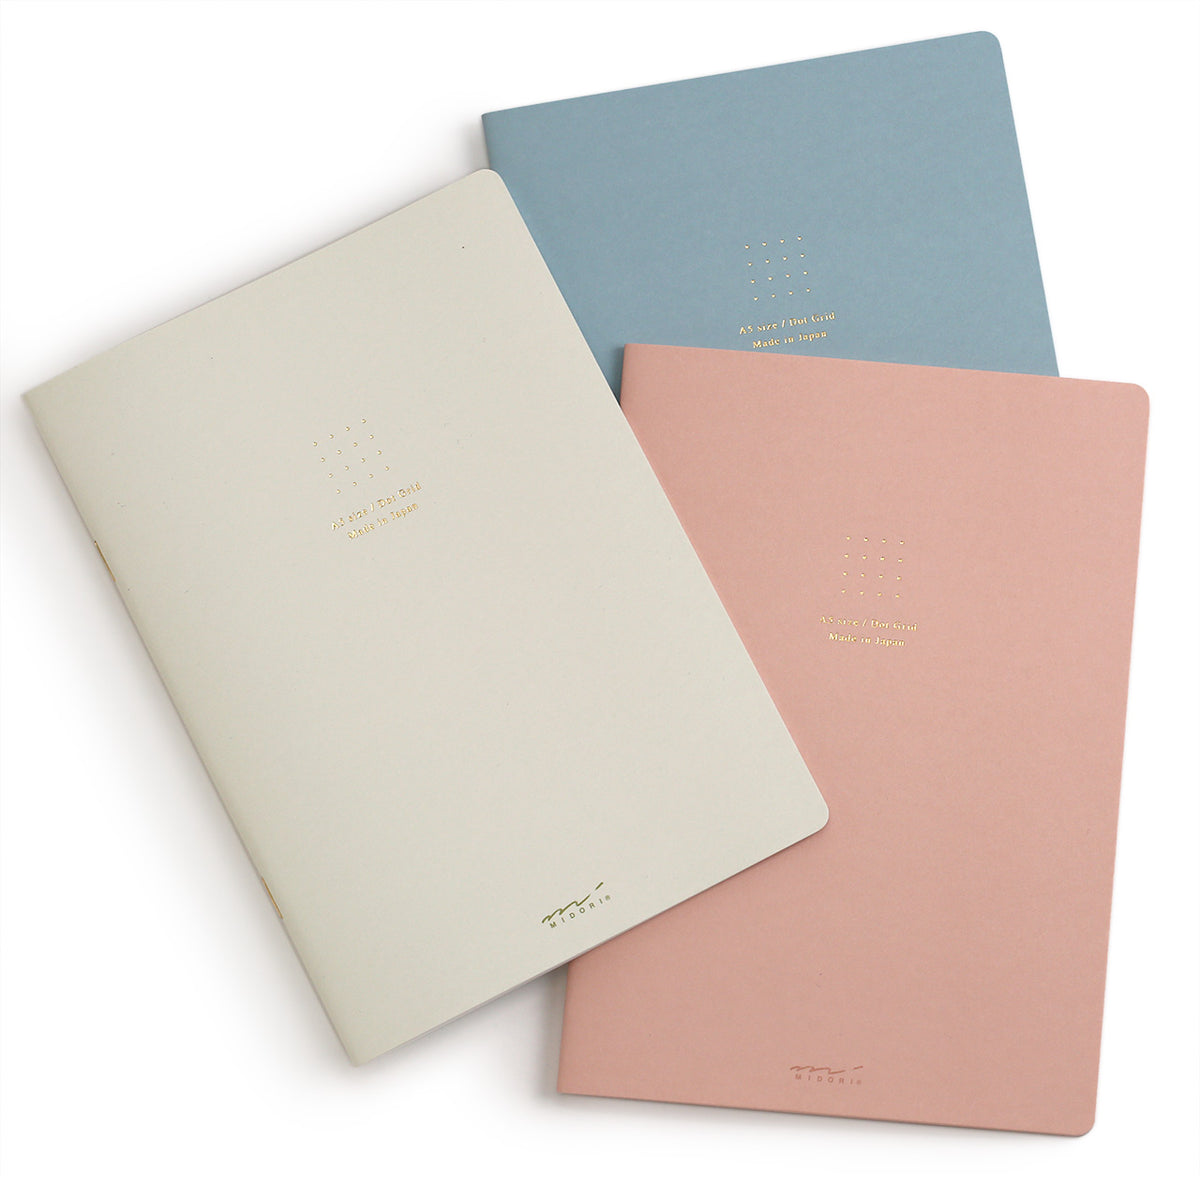 overlapping notebooks from a topview showing the pink blue and white covers with gold stamping